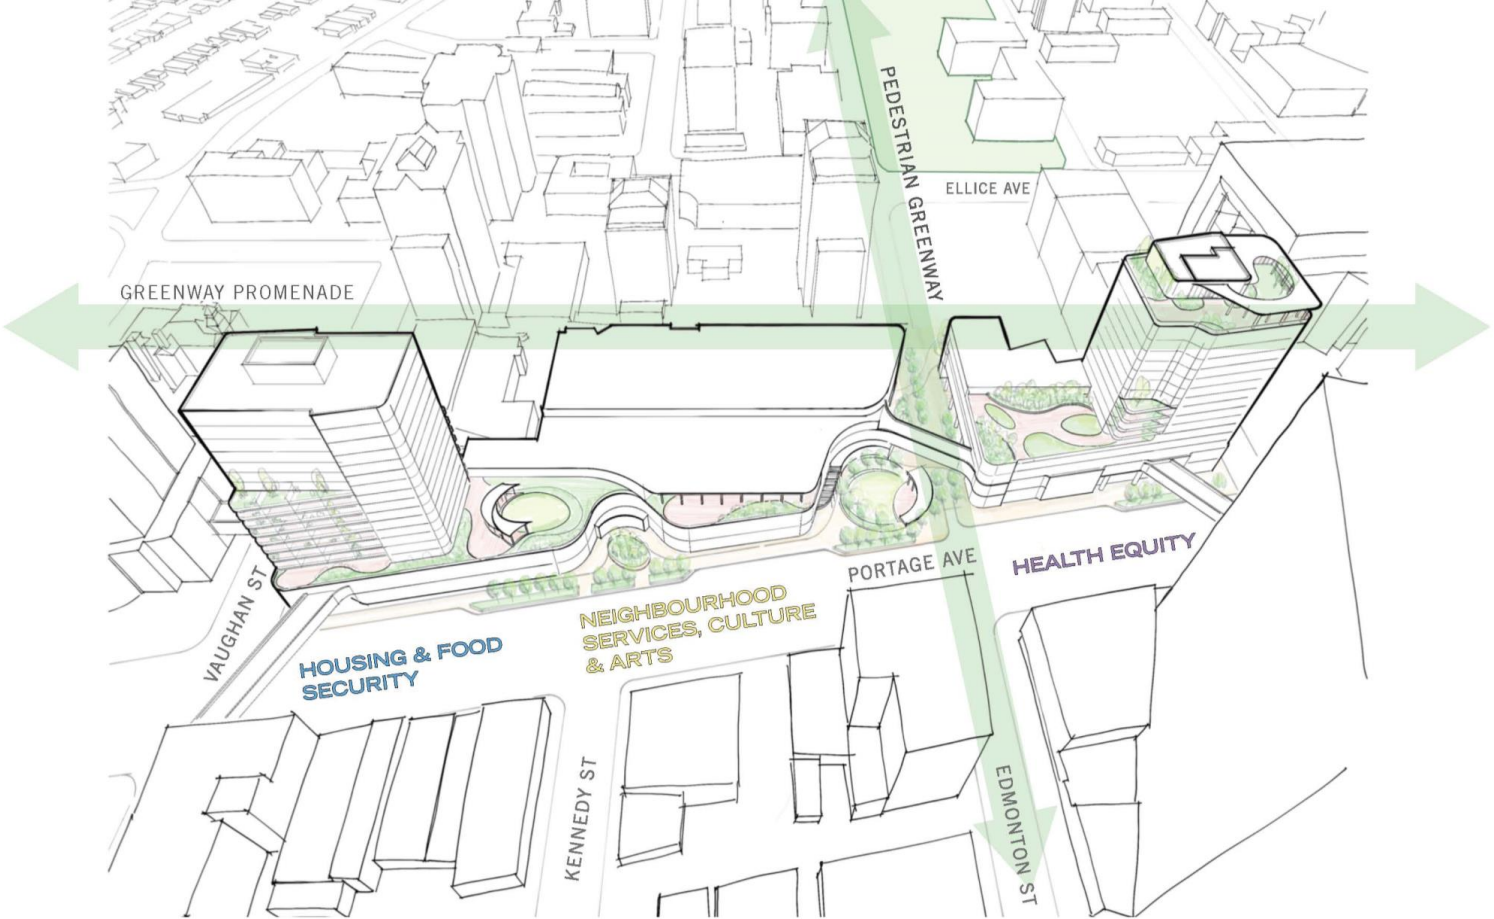 An artist's drawing depicts the planned changes to Winnipeg's Portage Place. The overhead map shows outlines of a building stretching a city block, flanked by two yet-to-be-built towers at each end. The drawing shows Edmonton Street cutting through the building to connect Portage Avenue to the north side of the property.